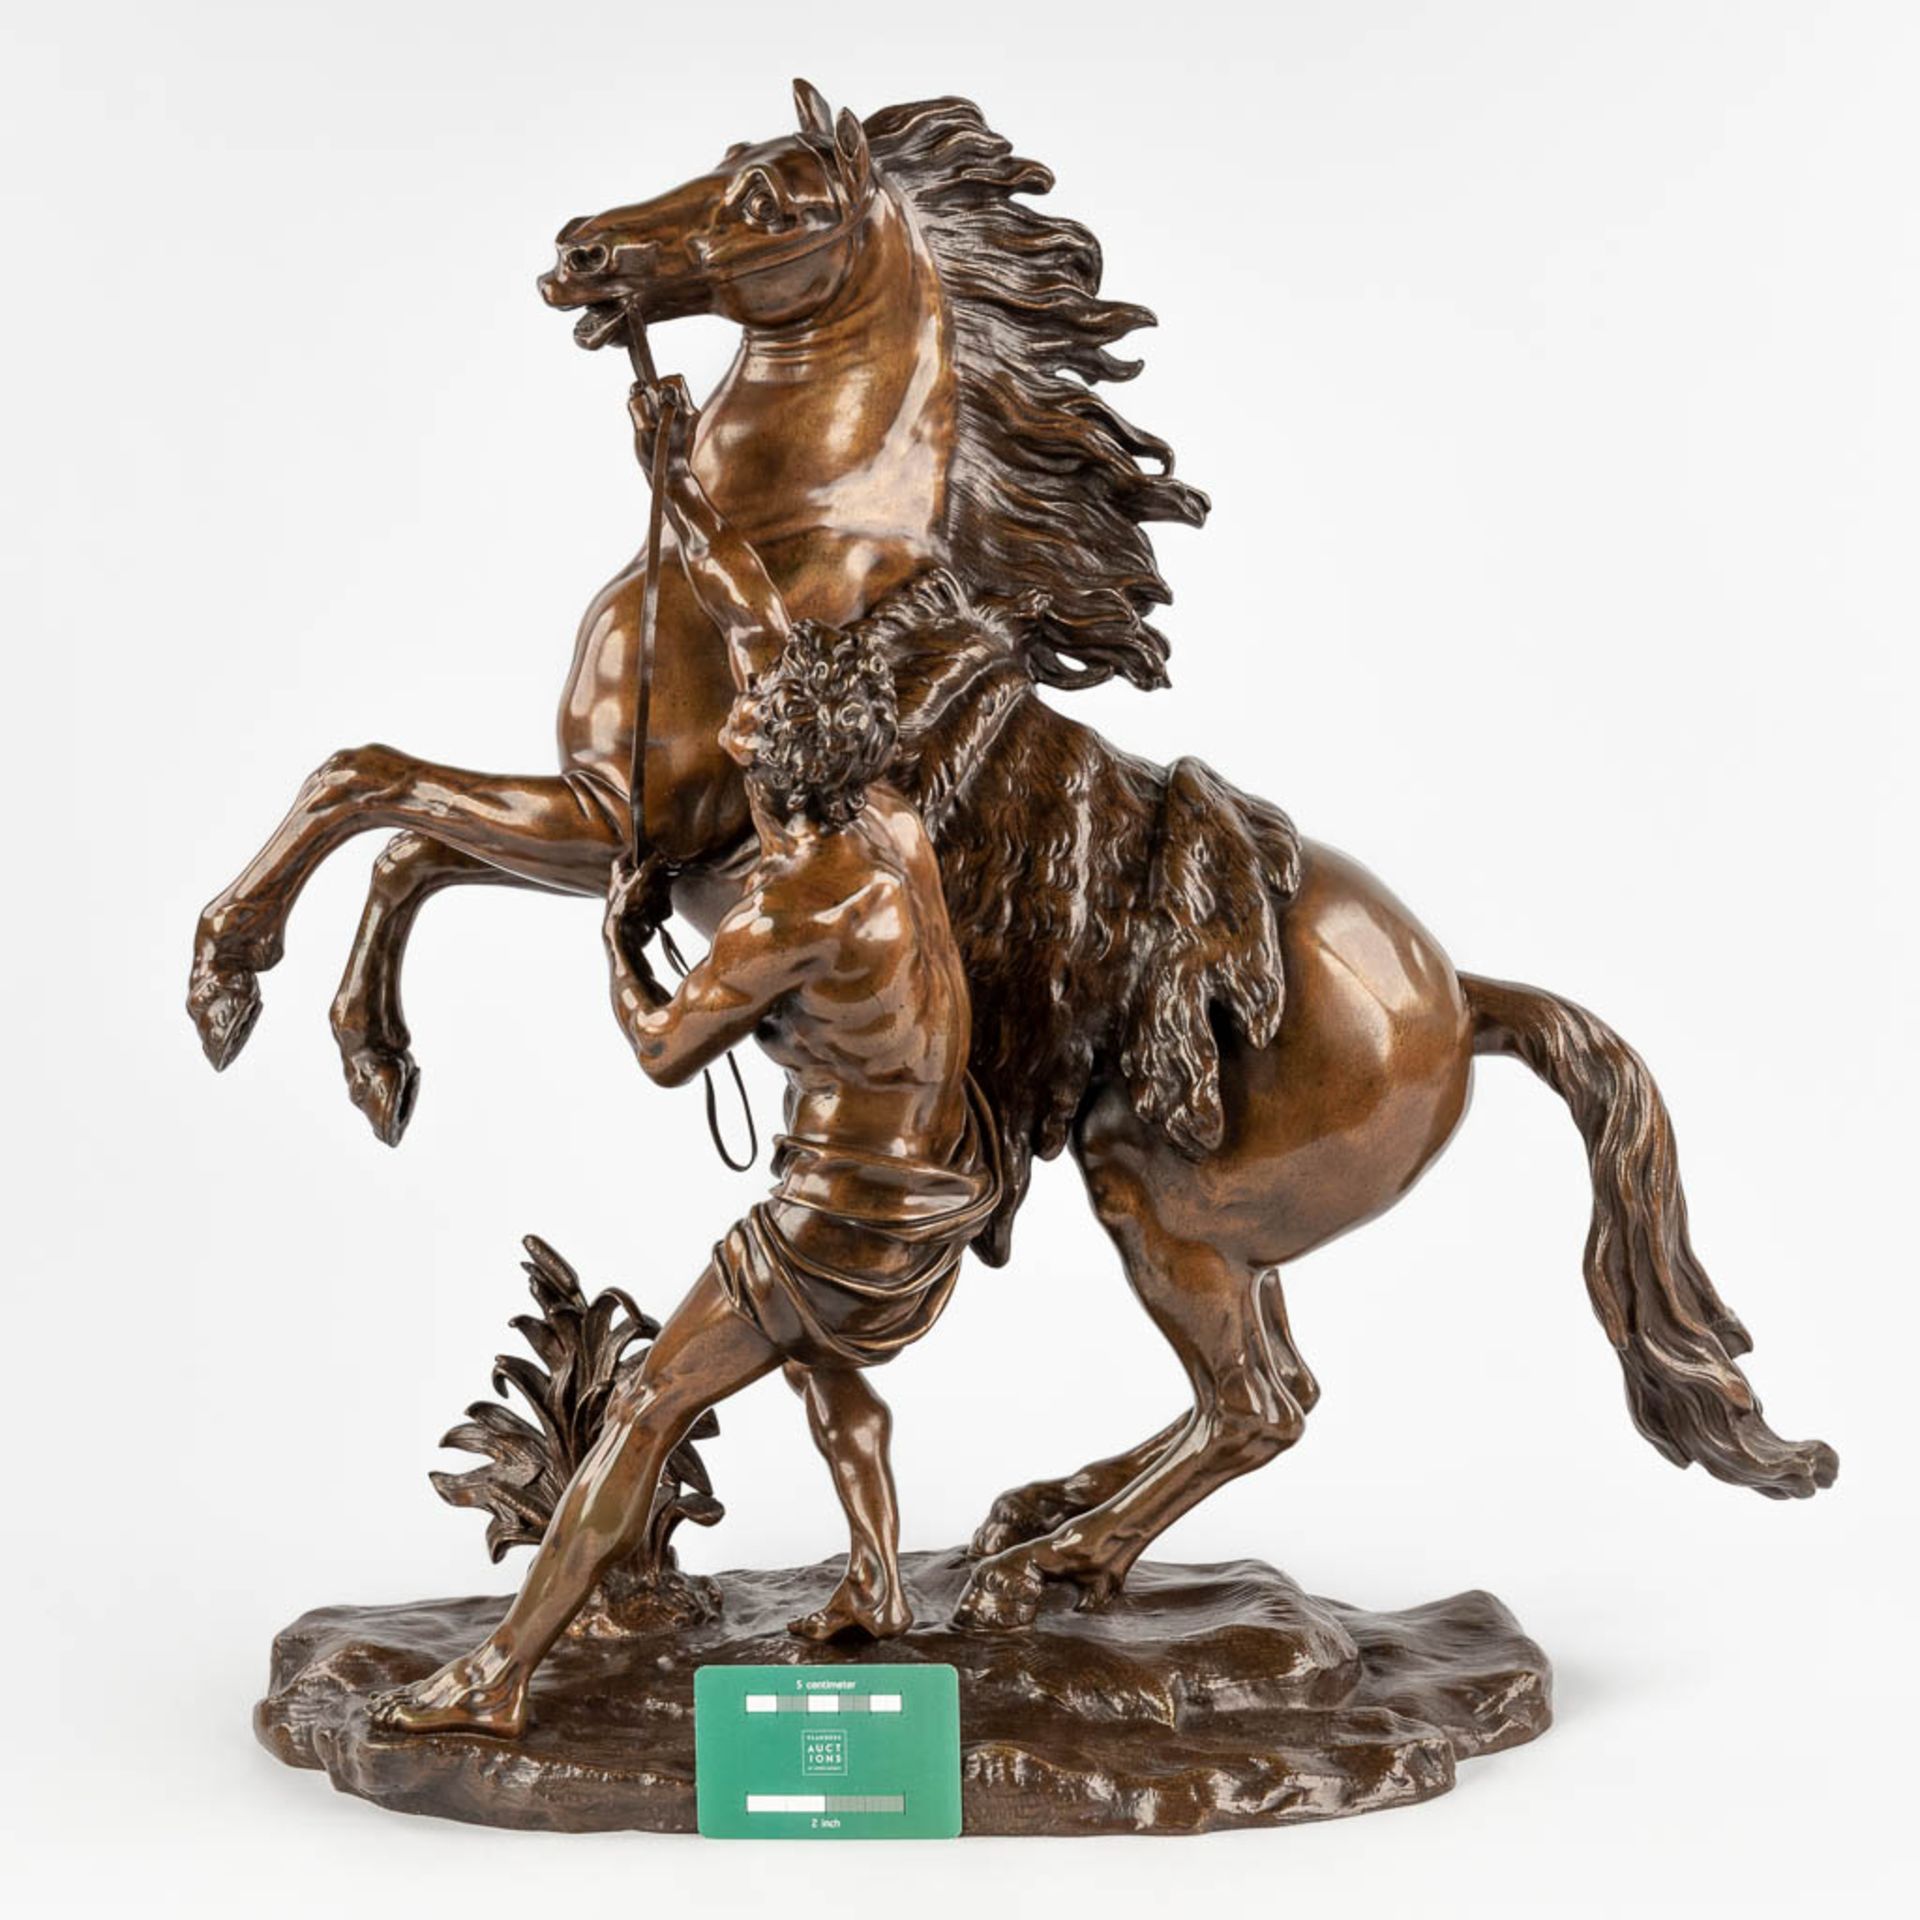 Guillaume I COUSTOU (1677-1746)(after), 'Marly horse' patinated bronze. (D:26 x W:56 x H:58 cm) - Image 2 of 12